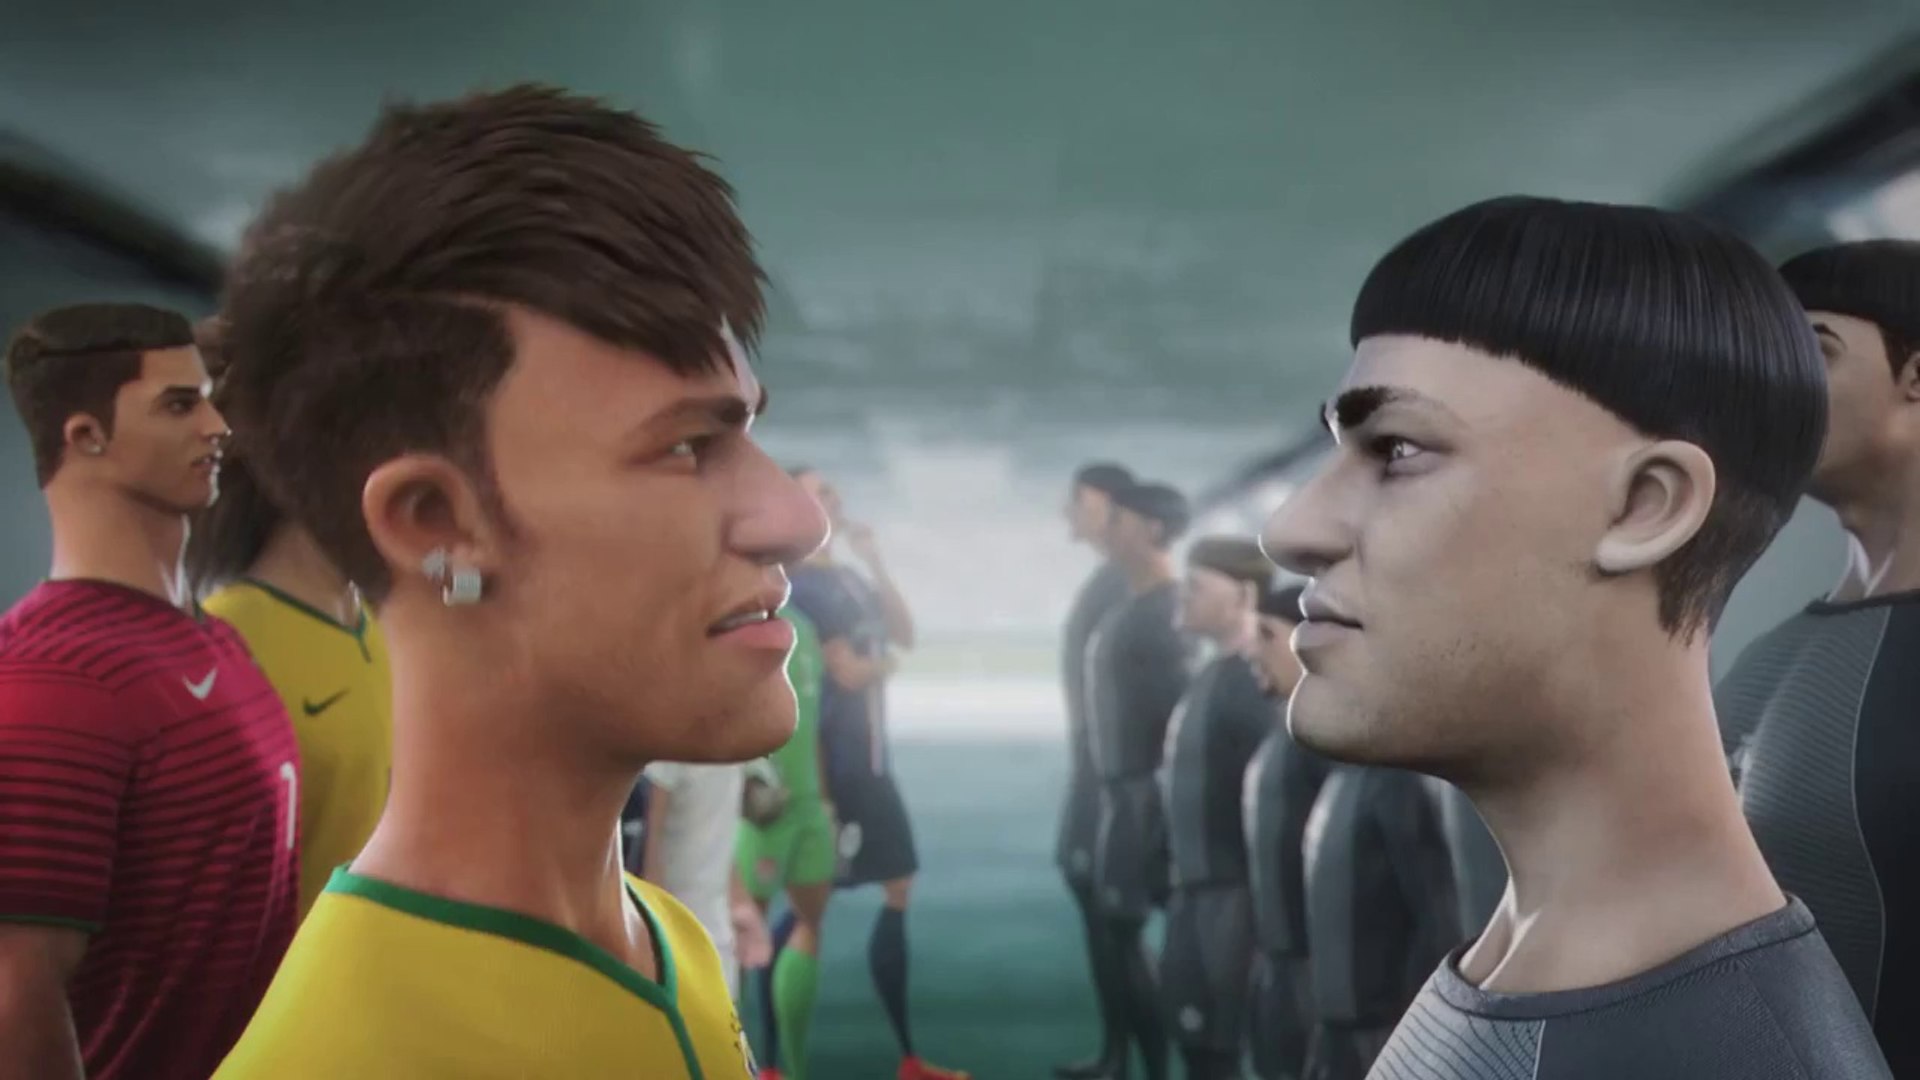 Awesome commercial ads by Nike Footbal - Neymar Jr. vs. The Clones - Vidéo  Dailymotion